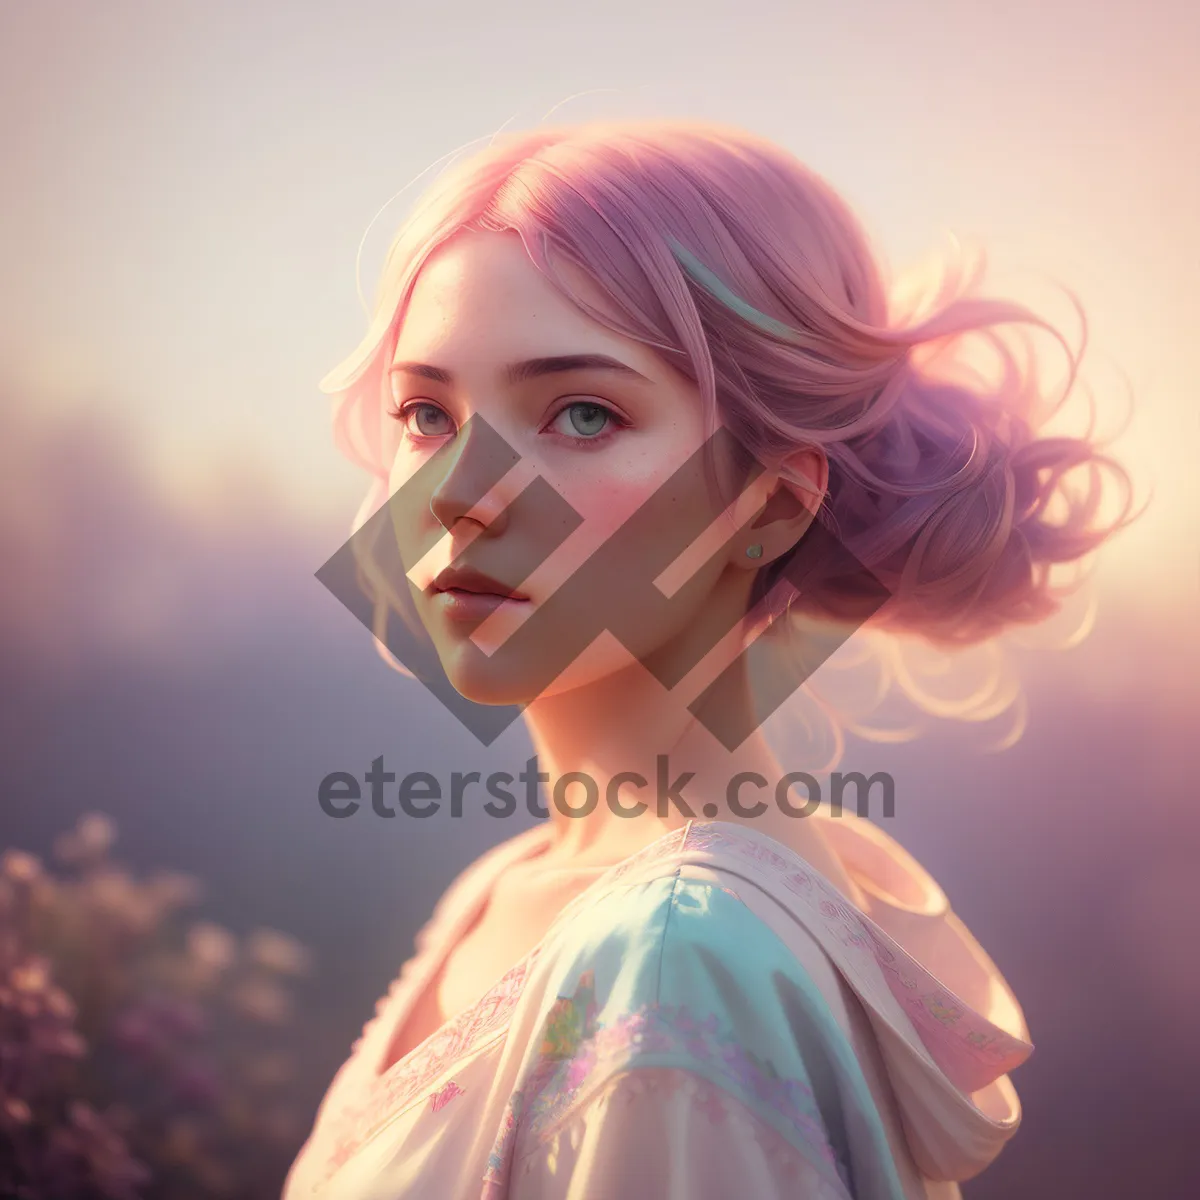 Picture of Beautiful Princess Portrait: Attractive Blonde Lady with Elegant Style